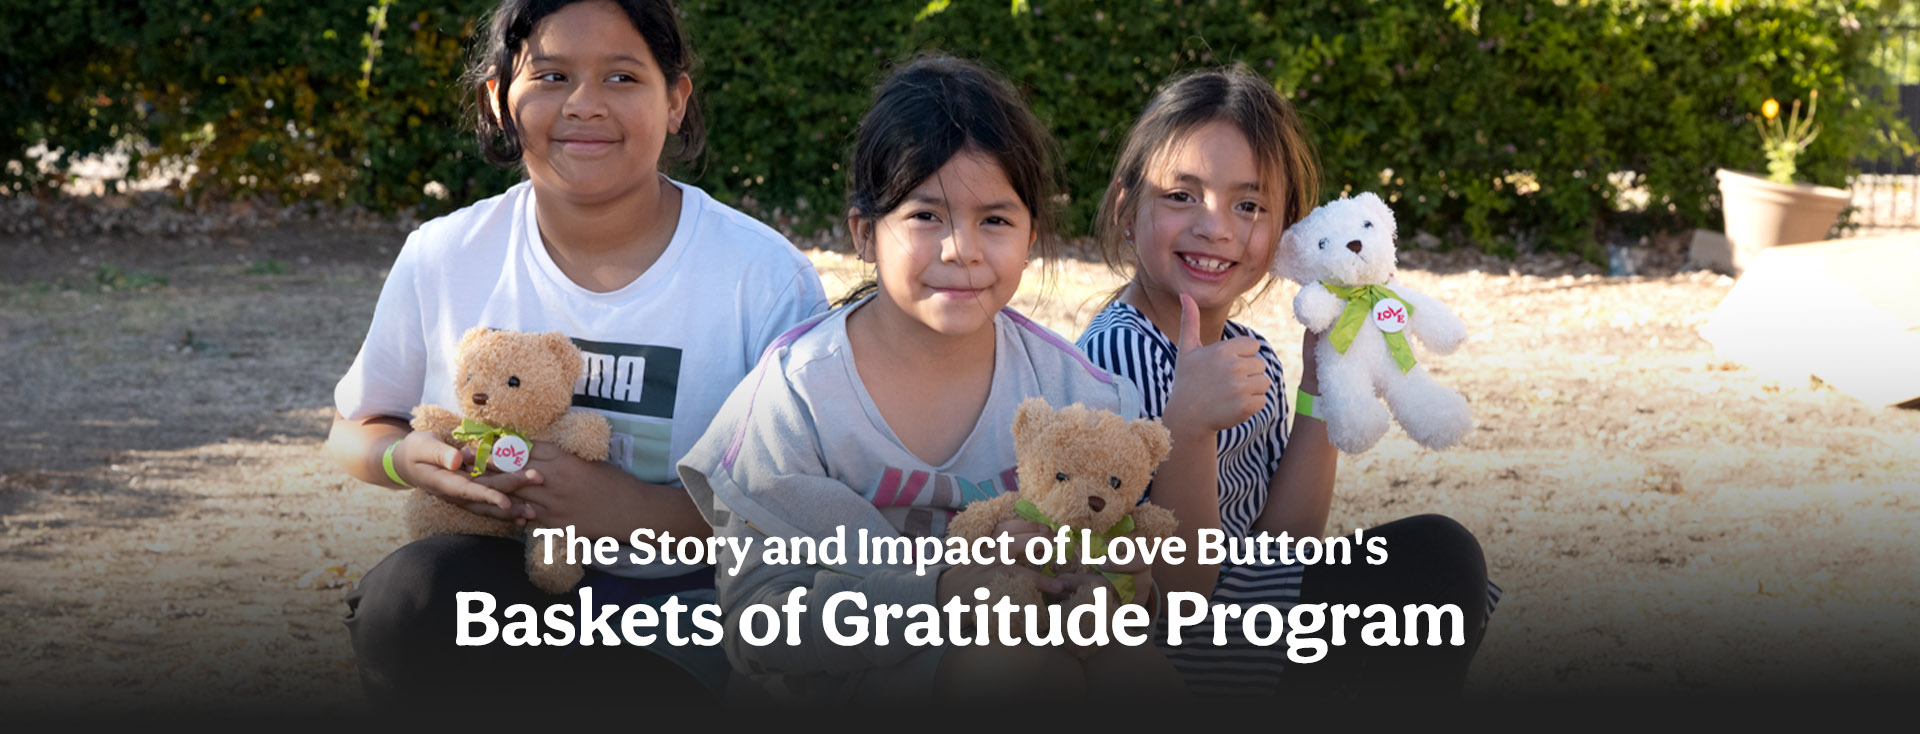 The Story and Impact of Love Button's Baskets of Gratitude Program (VIDEO)